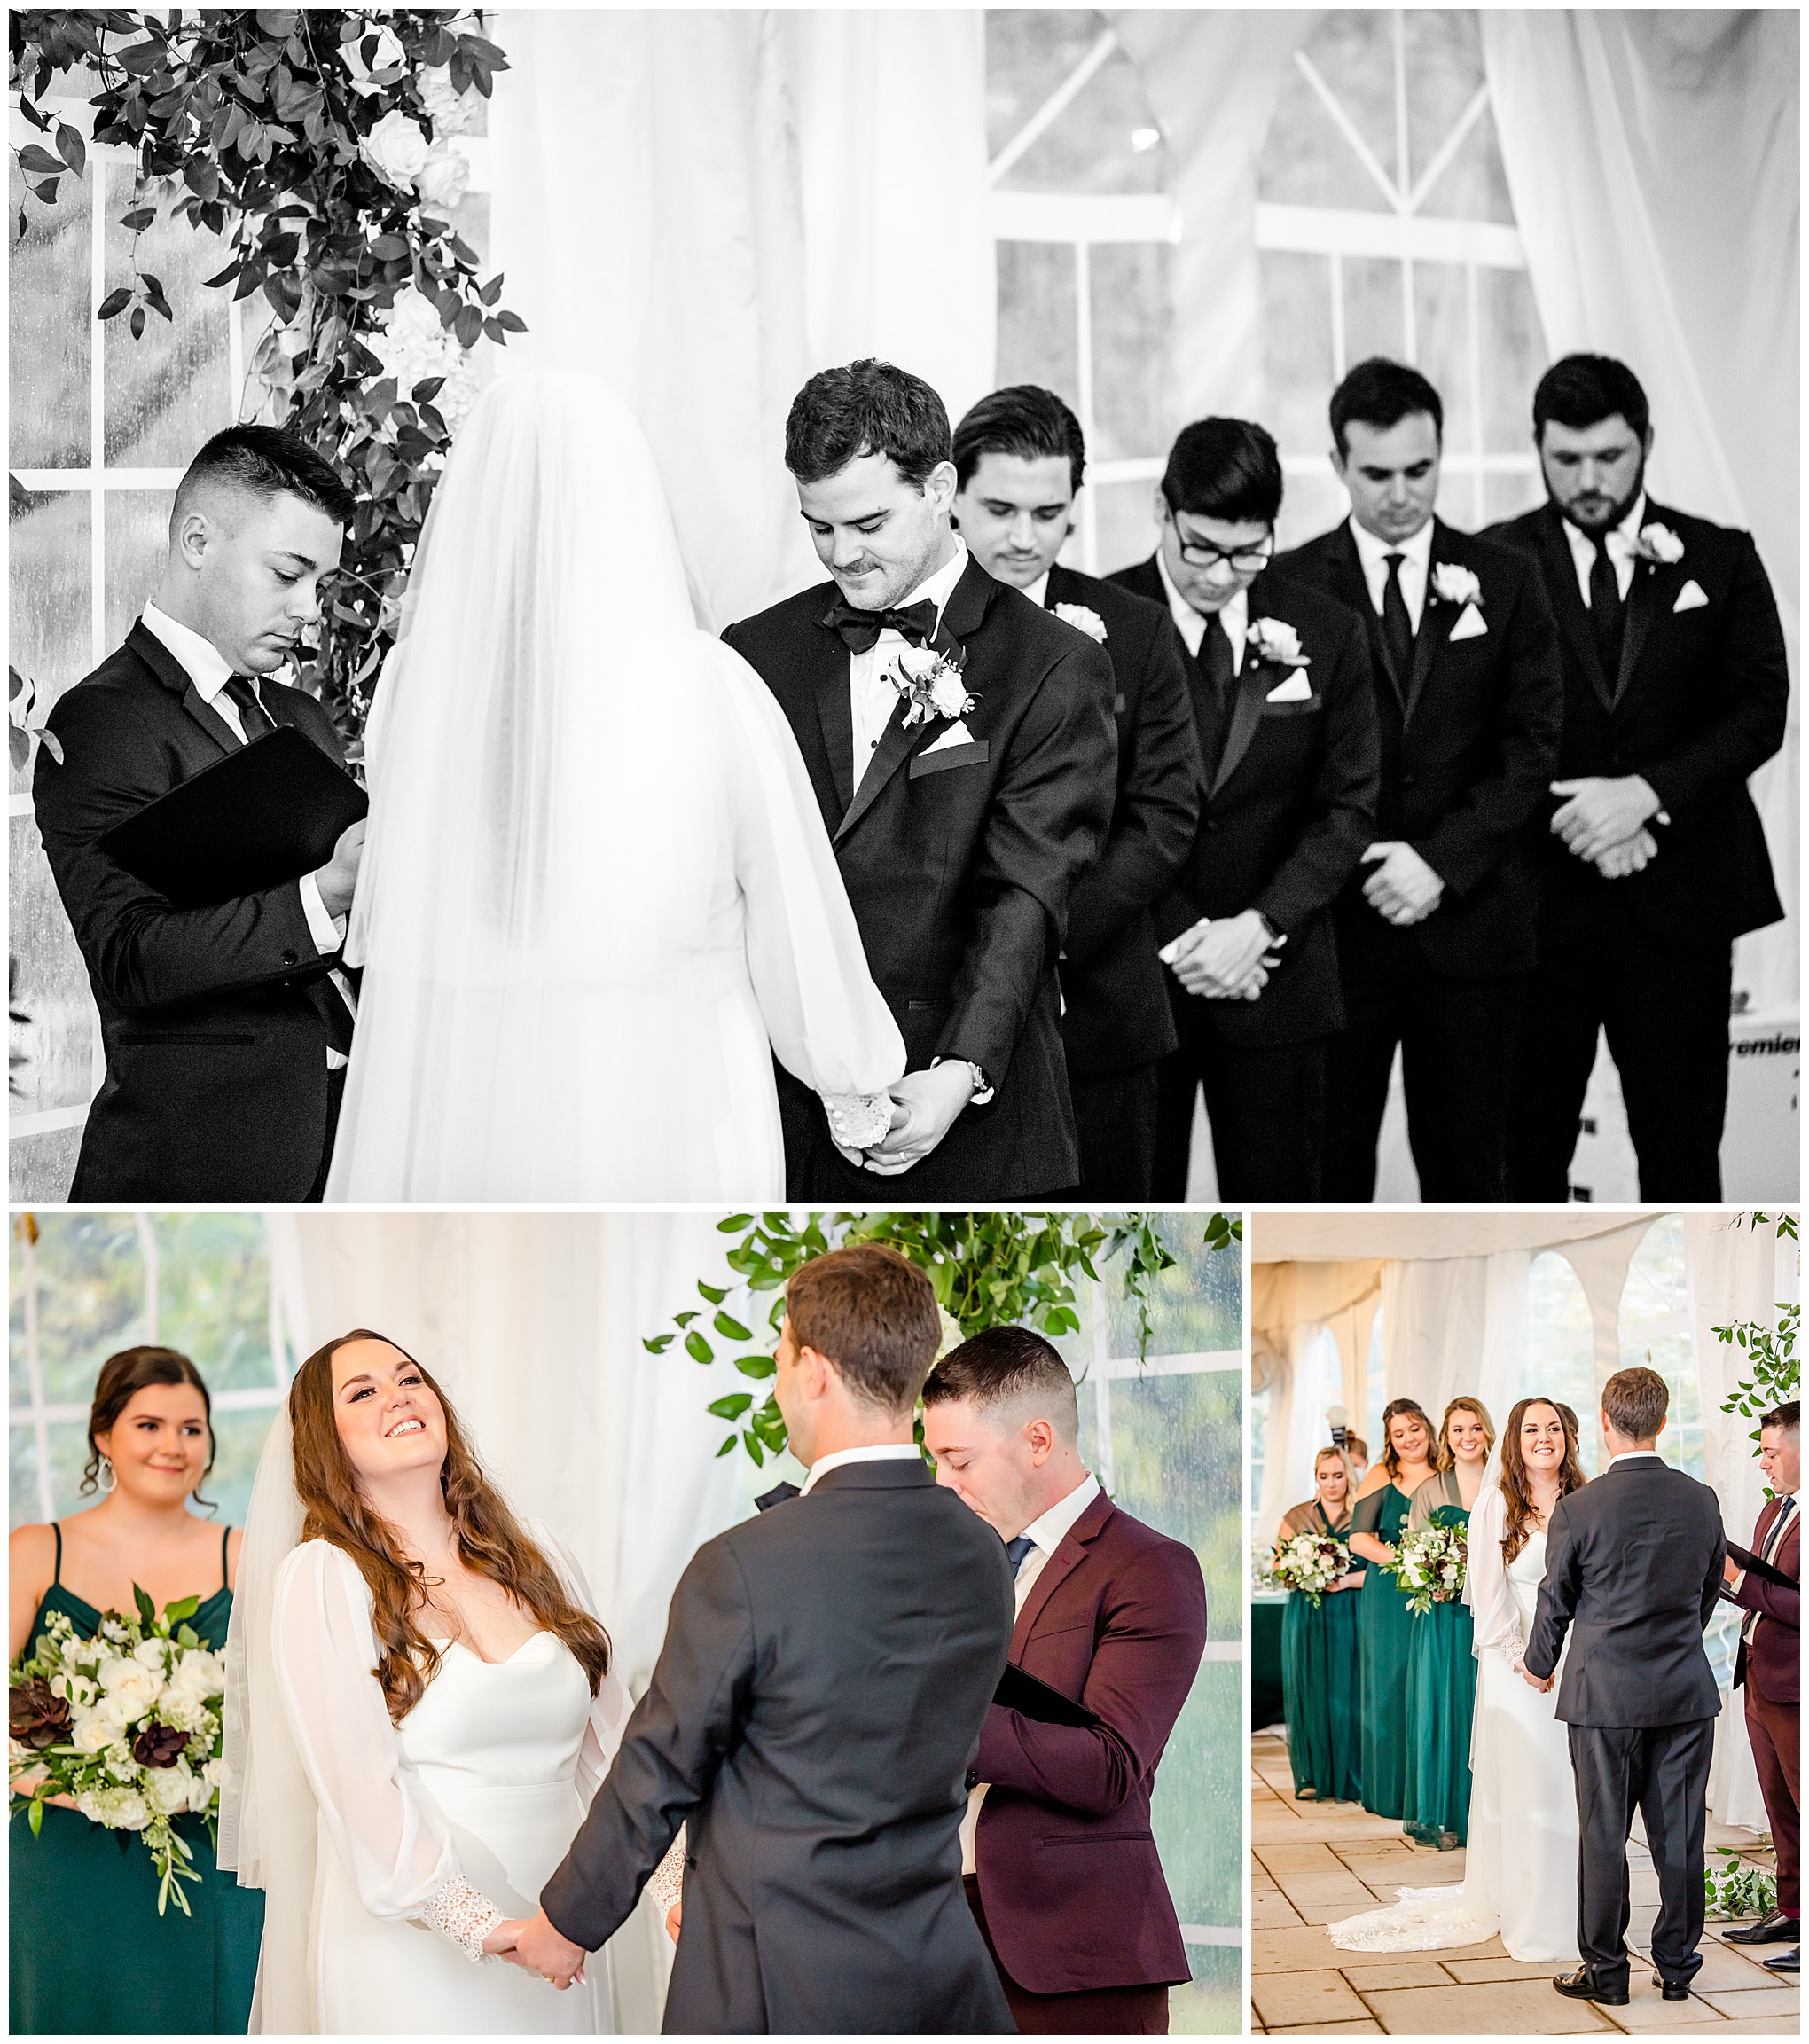 emerald and ivory Woodend Sanctuary wedding, autumn Woodend Sanctuary wedding, rainy day wedding, Maryland wedding venues, Chevy Chase MD wedding venue, mansion wedding, manor house wedding, indoor wedding, DC wedding venue, DC wedding photographer, Baltimore wedding photographer, Rachel E.H. Photography, emerald and ivory aesthetic, black and white, groom and groomsmen praying, praying at alter, bride with bridesmaids at alter